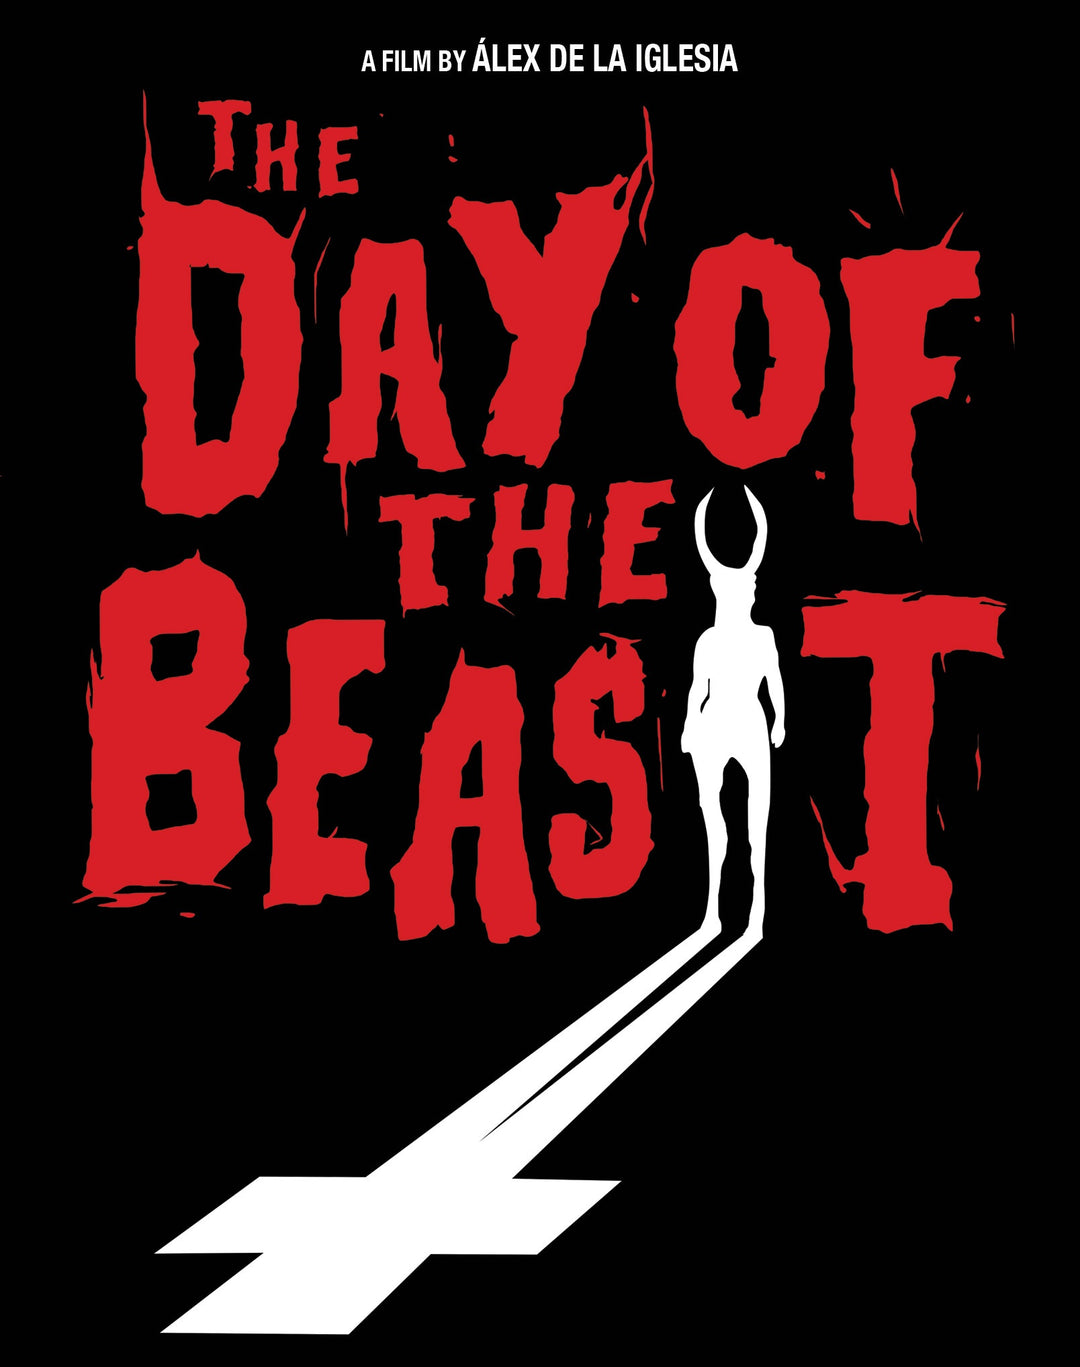 Day of the Beast [Blu-ray w/Slipcover]